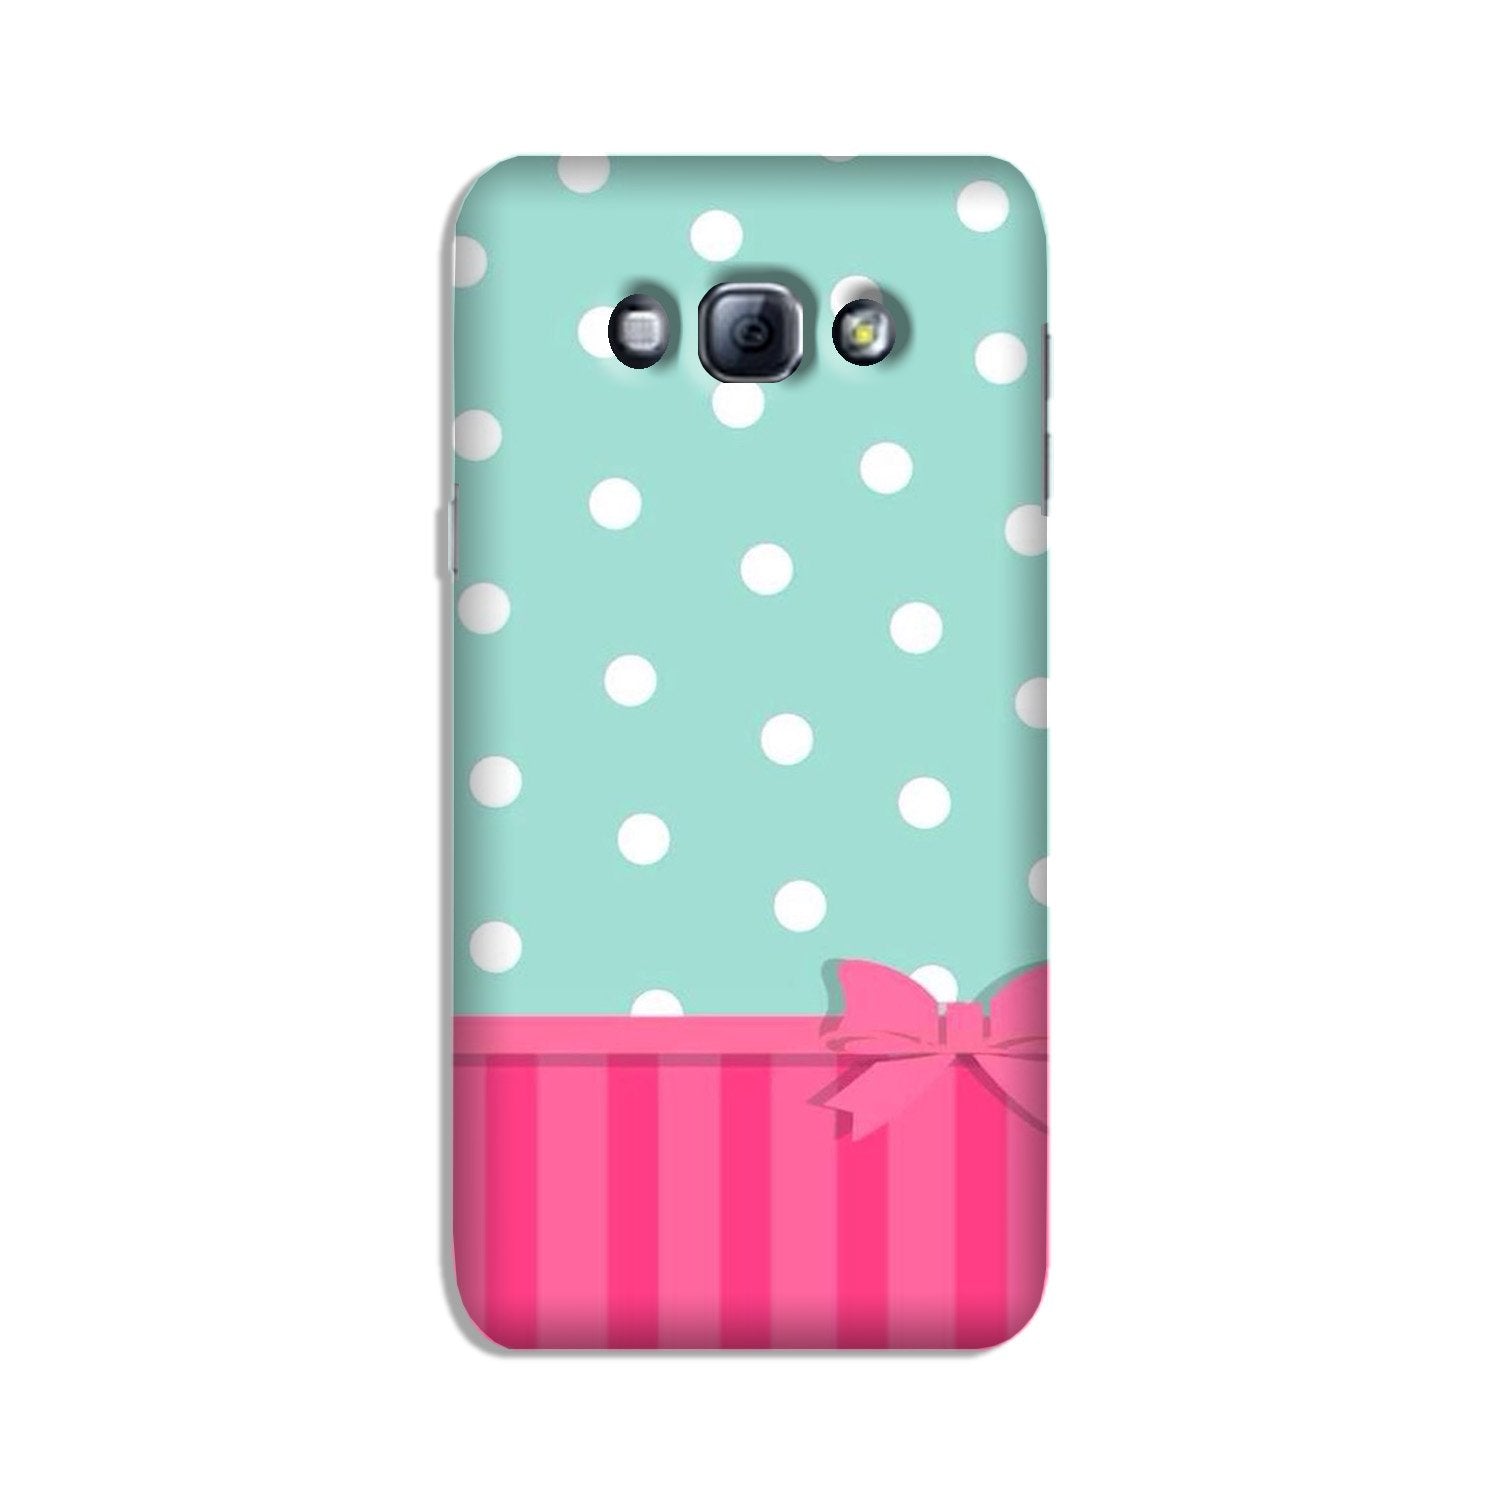 Gift Wrap Case for Galaxy A8 (2015)